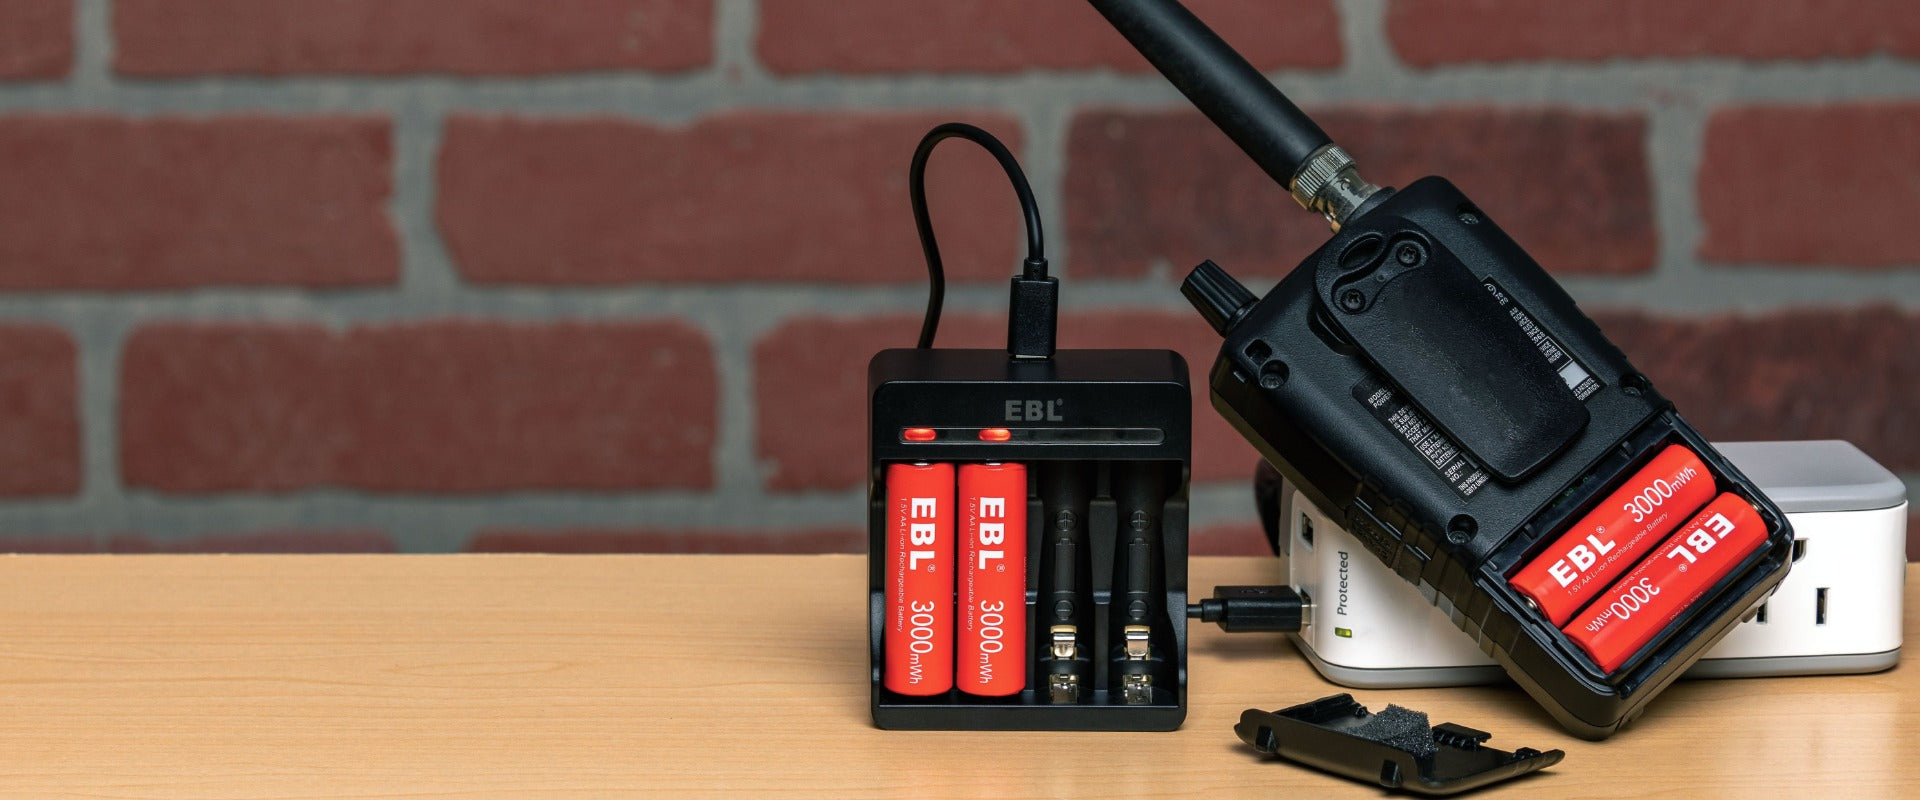 Tips For Battery Chargers - EBLOfficial